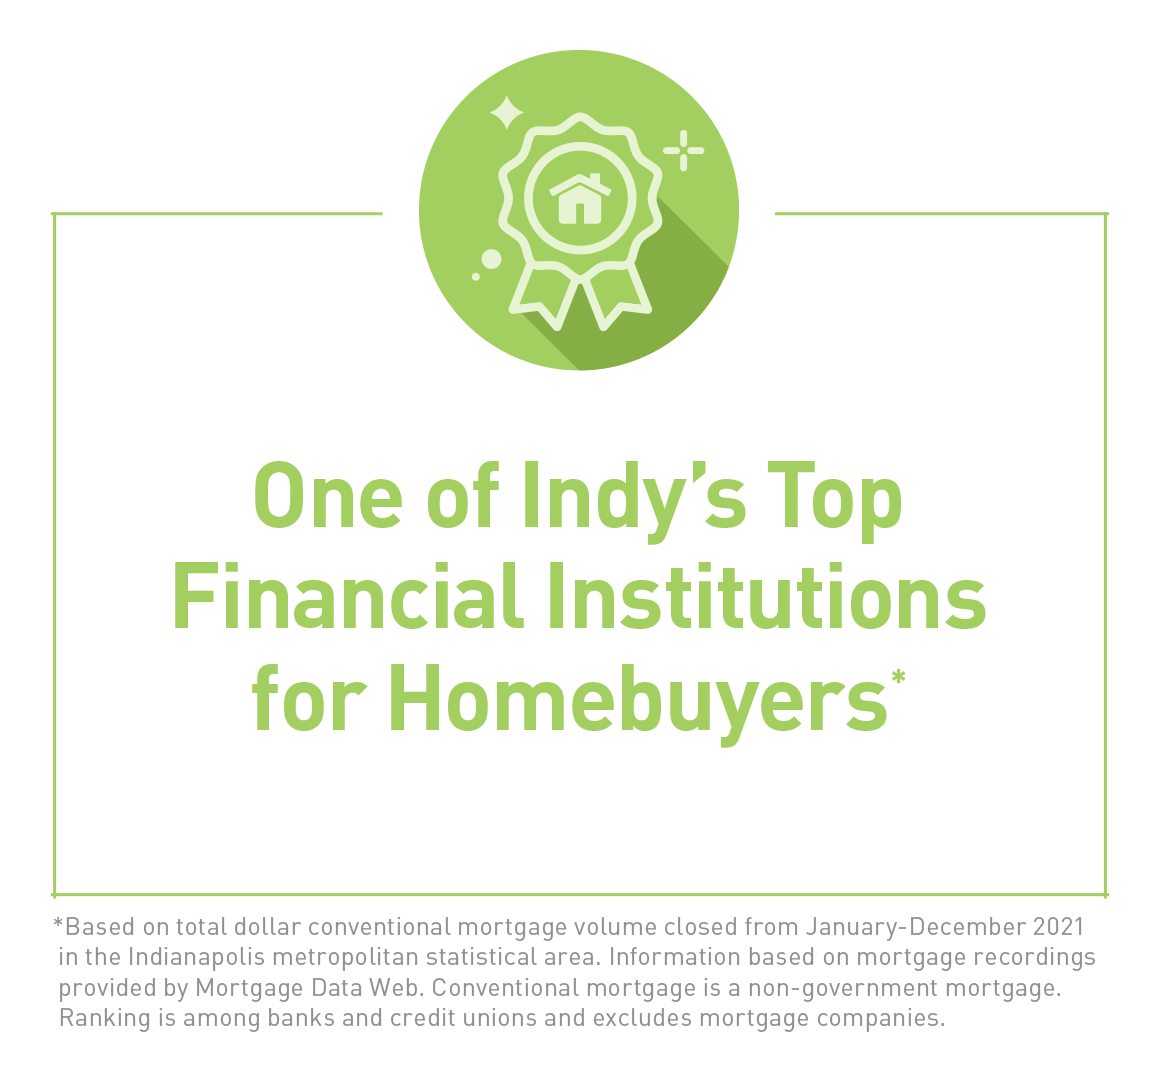 Indy's #1 Financial Institution for Conventional Mortgages